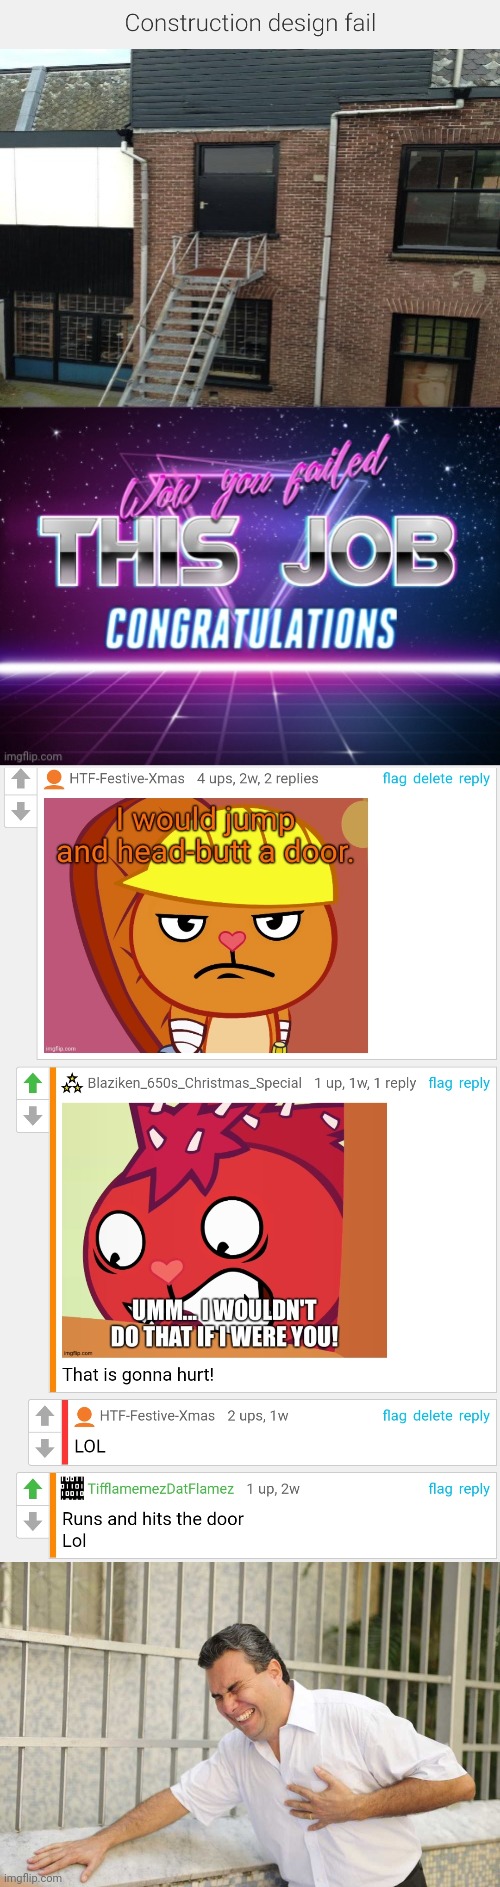 Head-butting a door would be hurt. | image tagged in ouch,funny,cursedcomments,happy tree friends | made w/ Imgflip meme maker